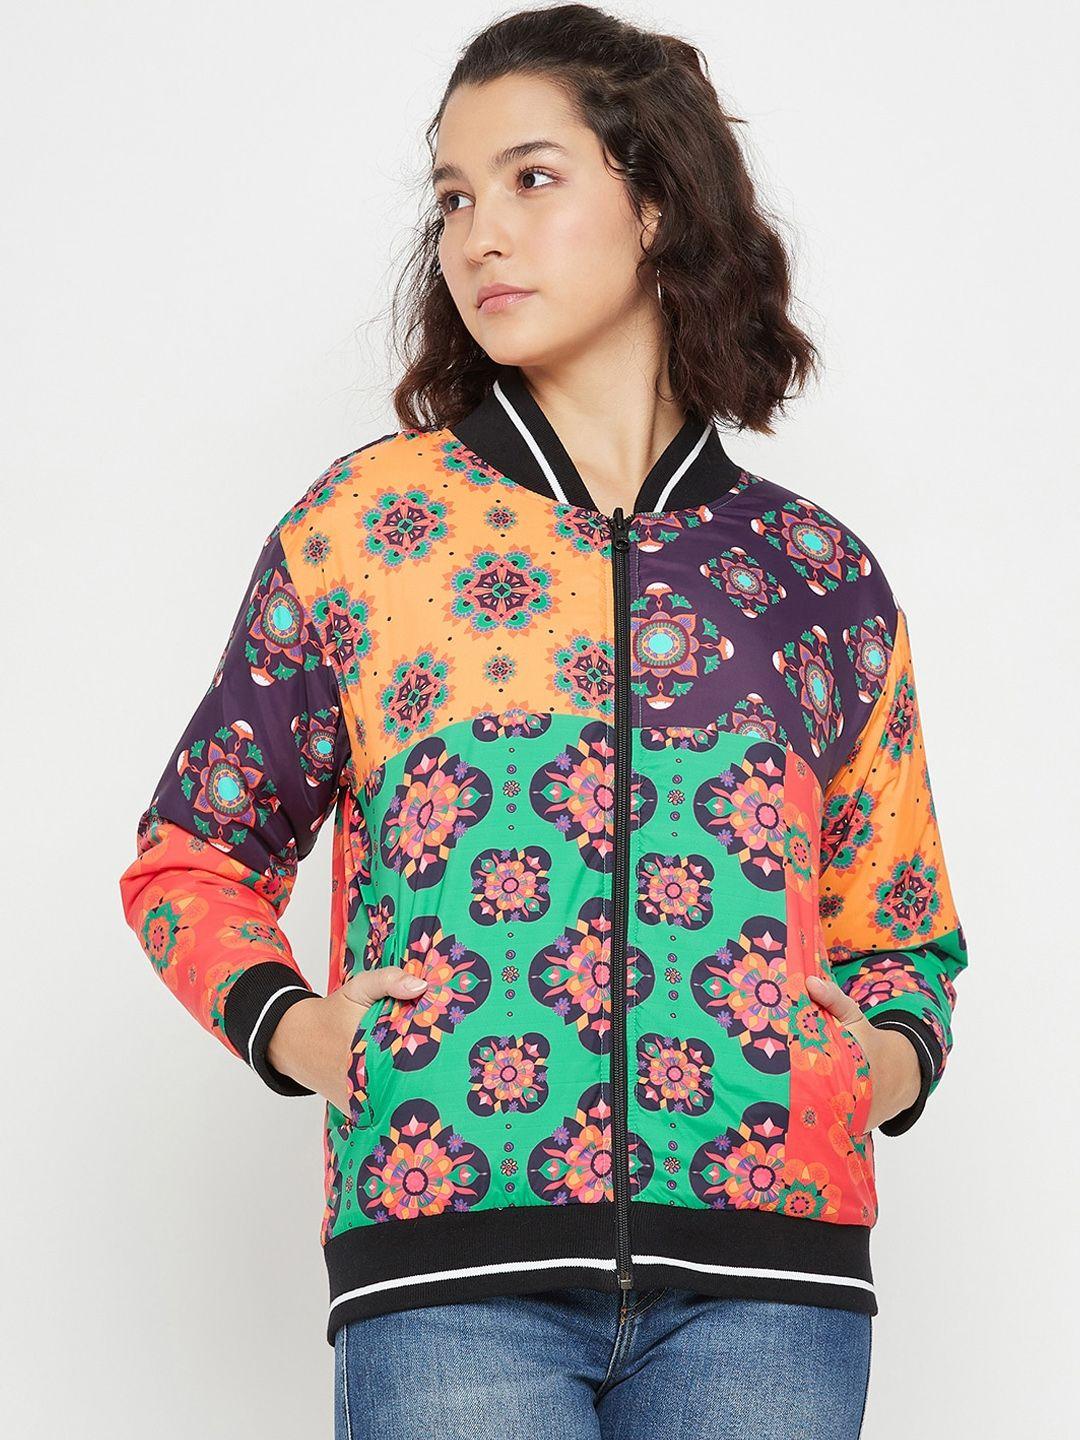 edrio  floral printed stand collar long sleeves reversible cotton bomber jacket